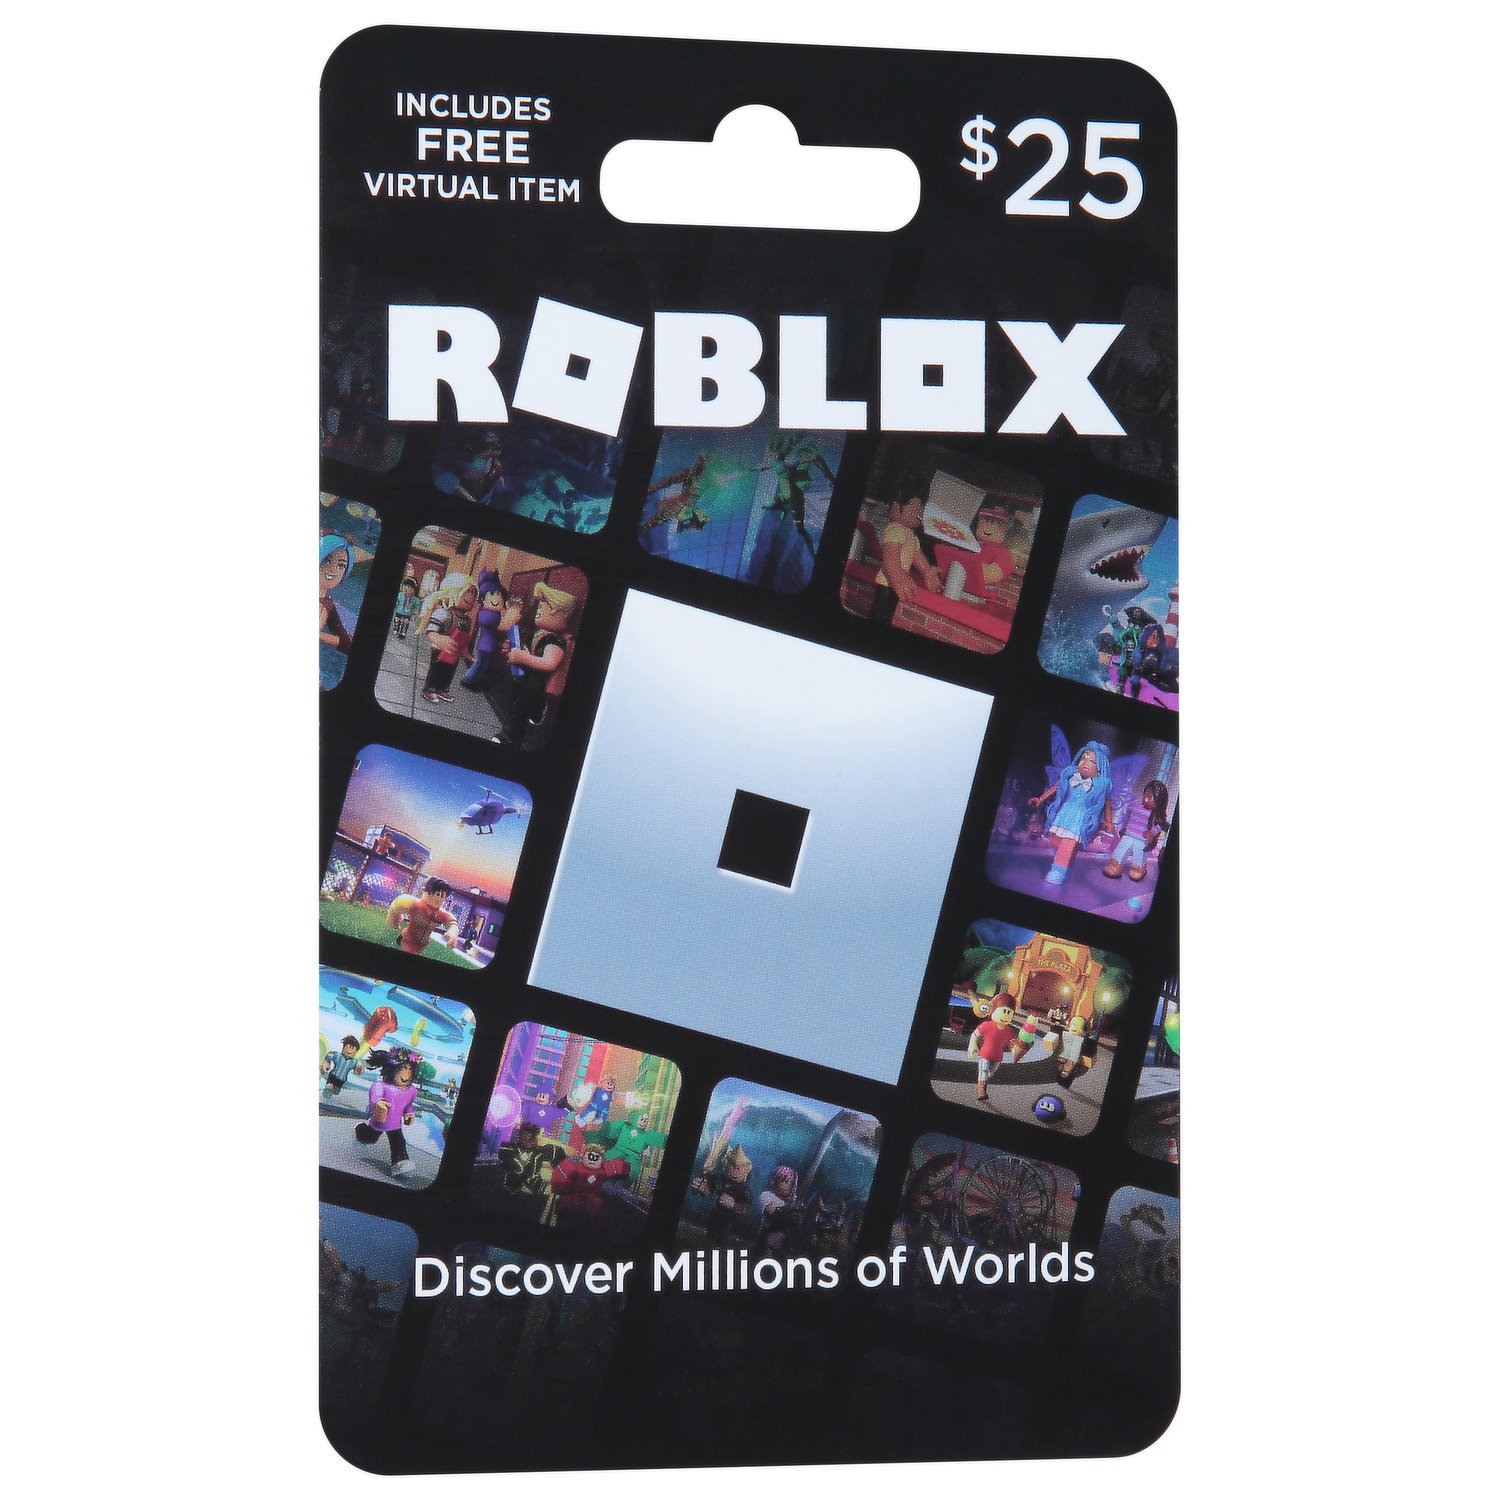 Roblox Archives - EZ PIN - Gift Card Articles, News, Deals, Bulk Gift Cards  and More